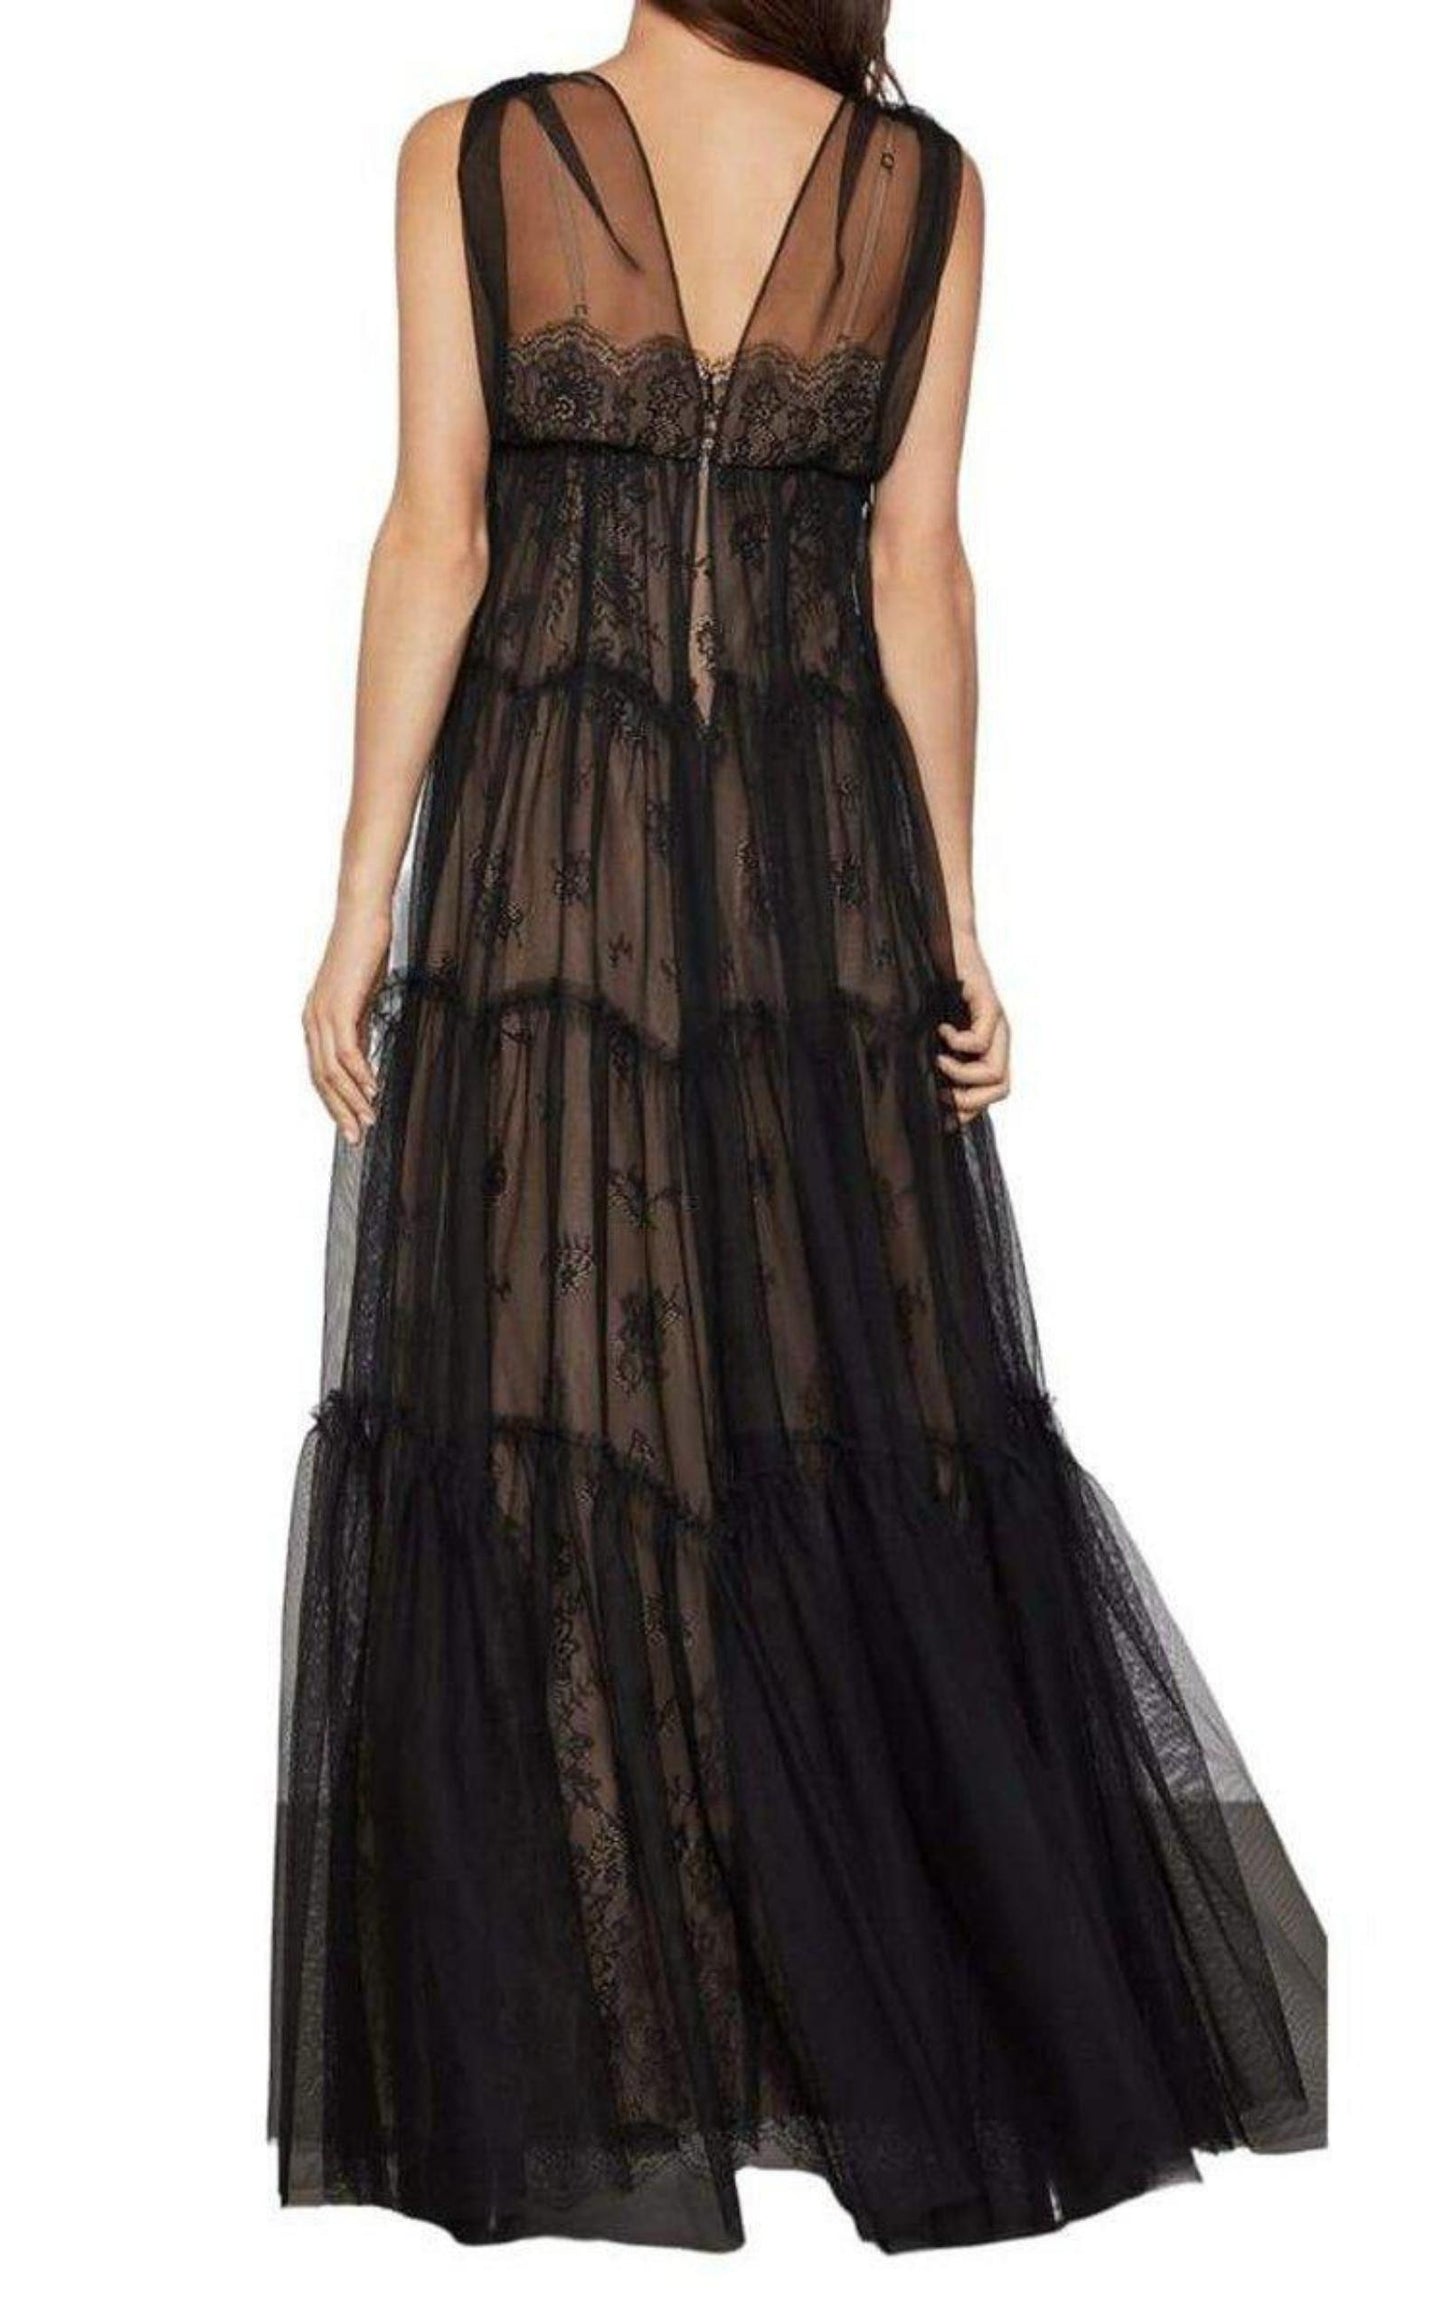  BCBGMAXAZRIALace Tulle Gown - Runway Catalog